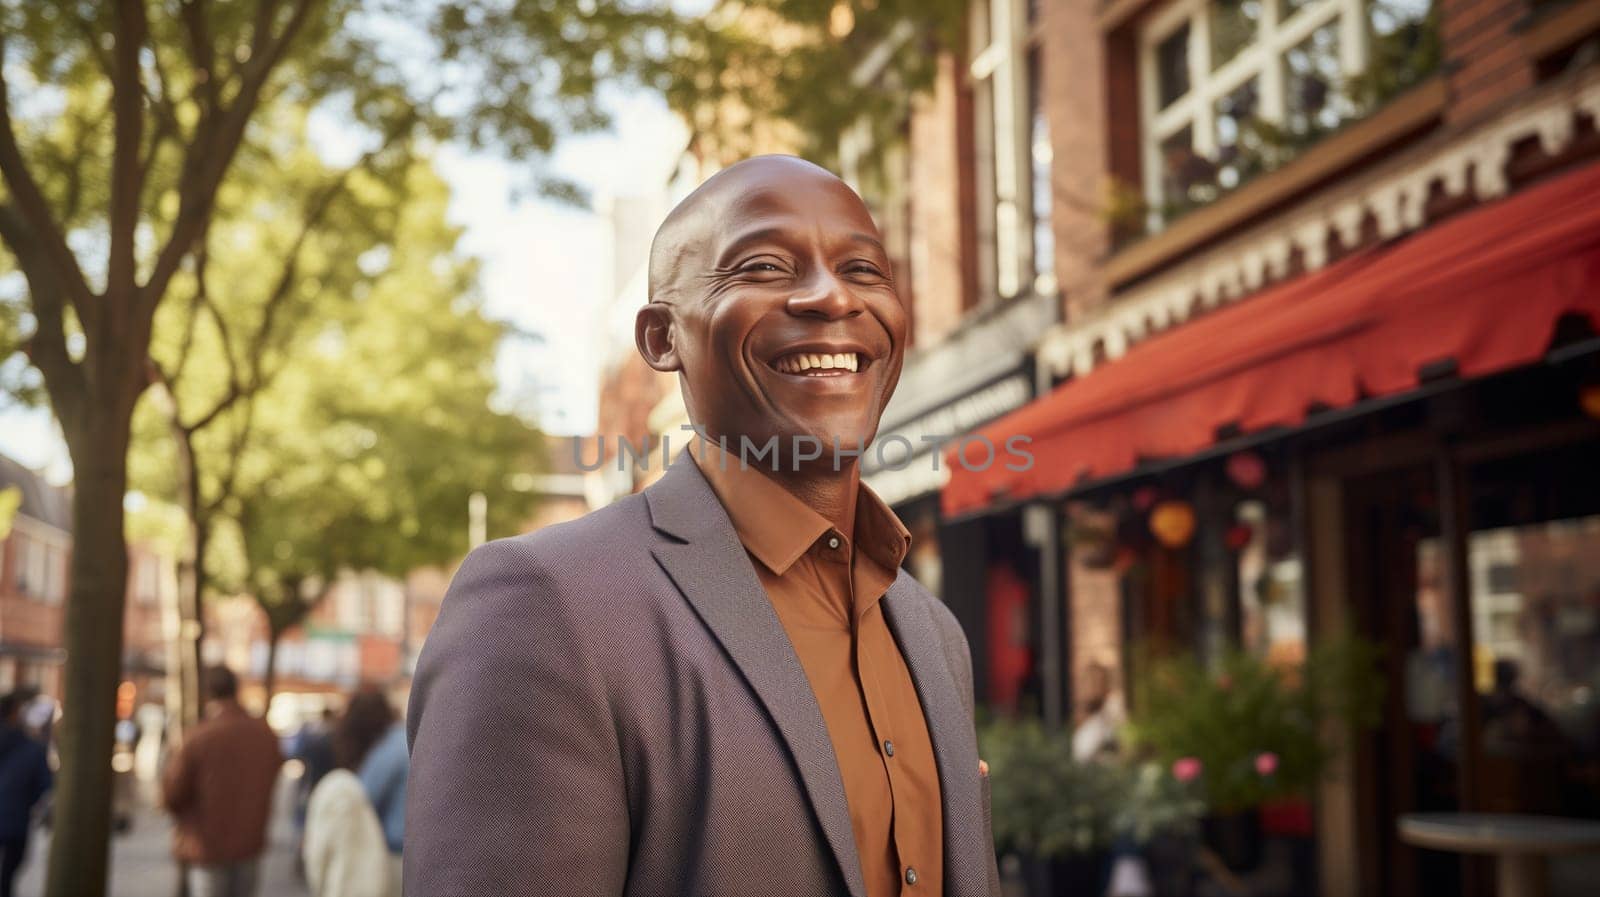 Portrait of cheerful happy smiling mature black businessman standing in the city, wearing business suit, looking away